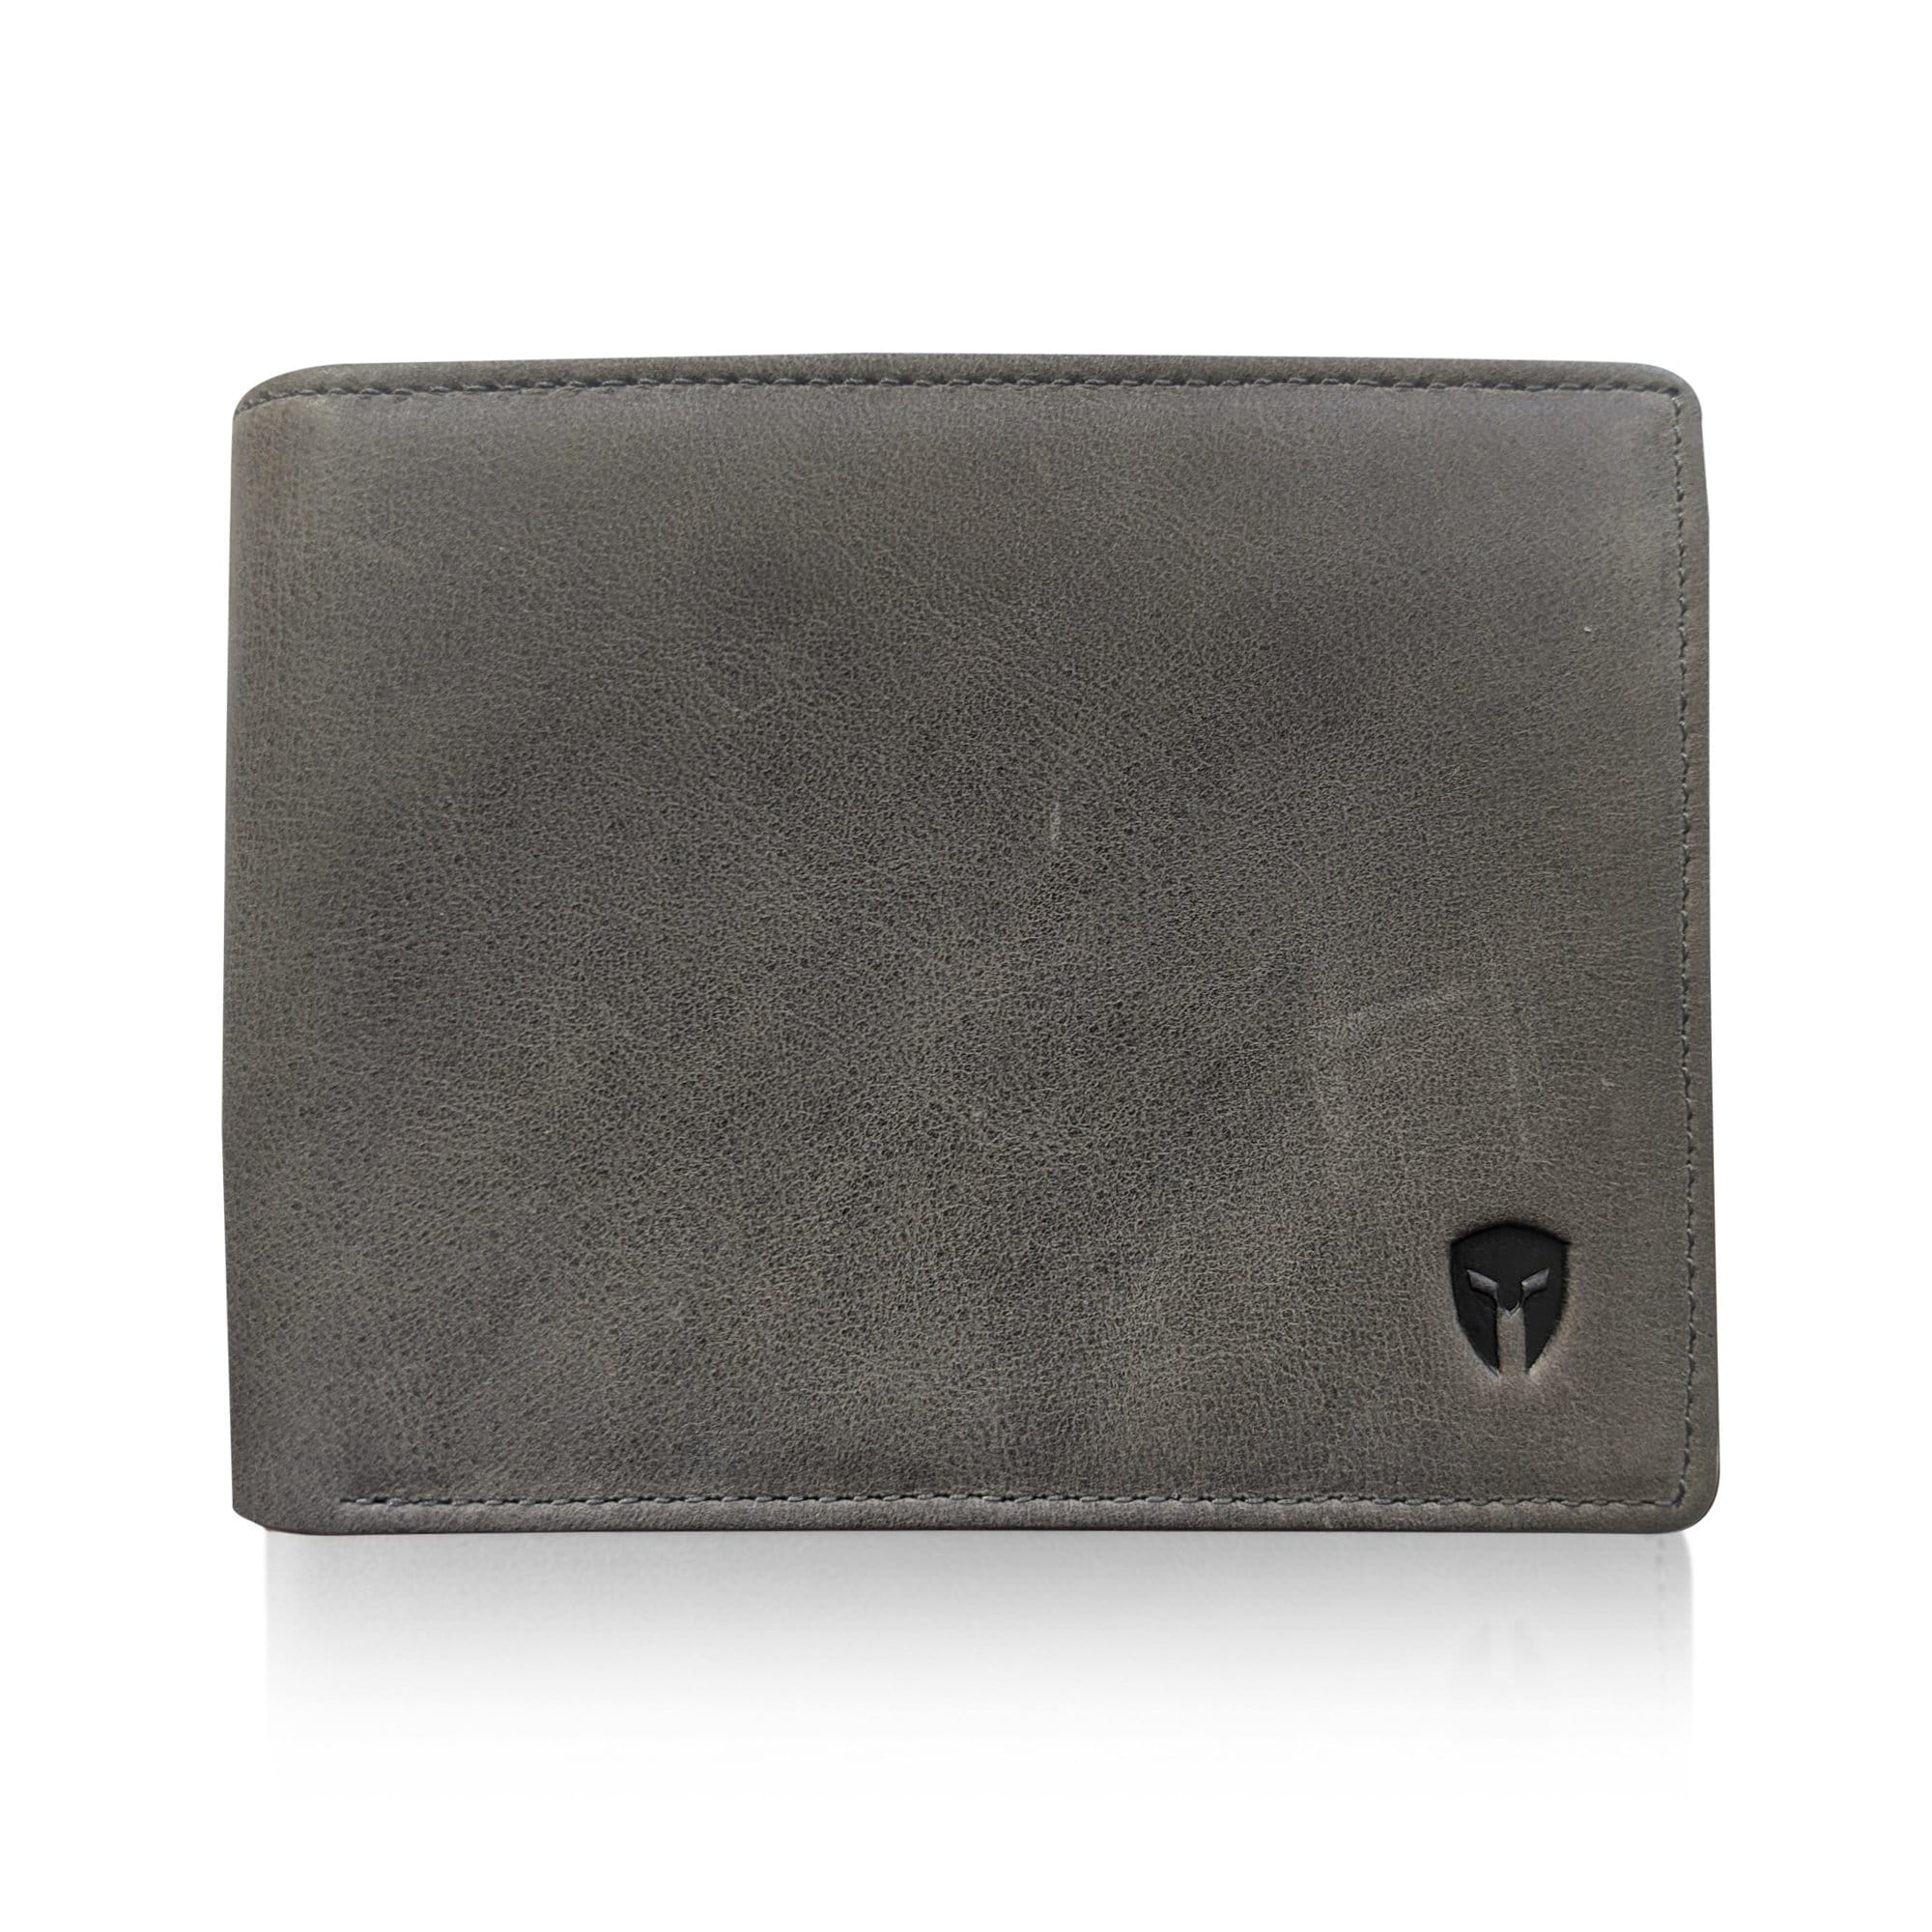 A review of the Bryker Hyde Vertical Bifold Wallet